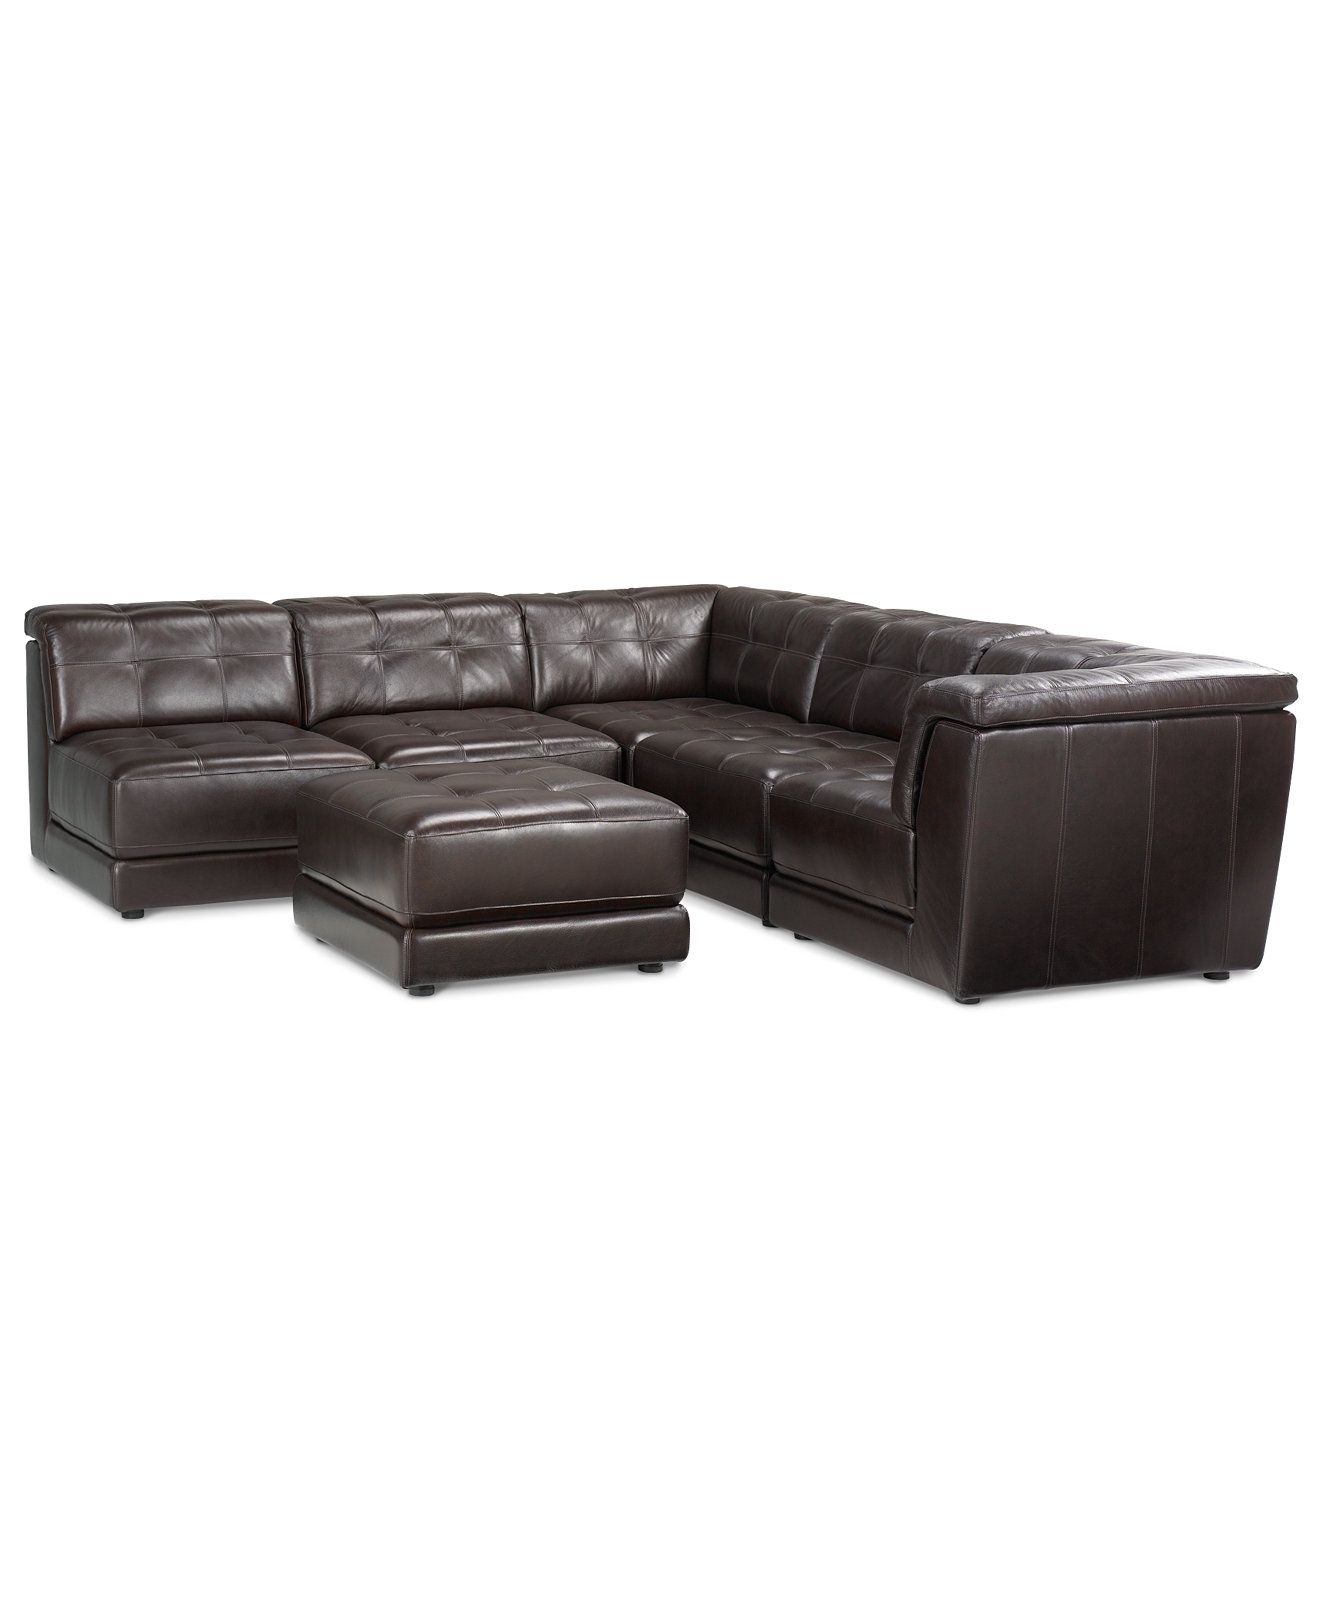 Stacey Leather 6 Piece Modular Sectional Sofa 3 Armless Chairs 2 In 6 Piece Leather Sectional Sofa (Photo 10 of 12)